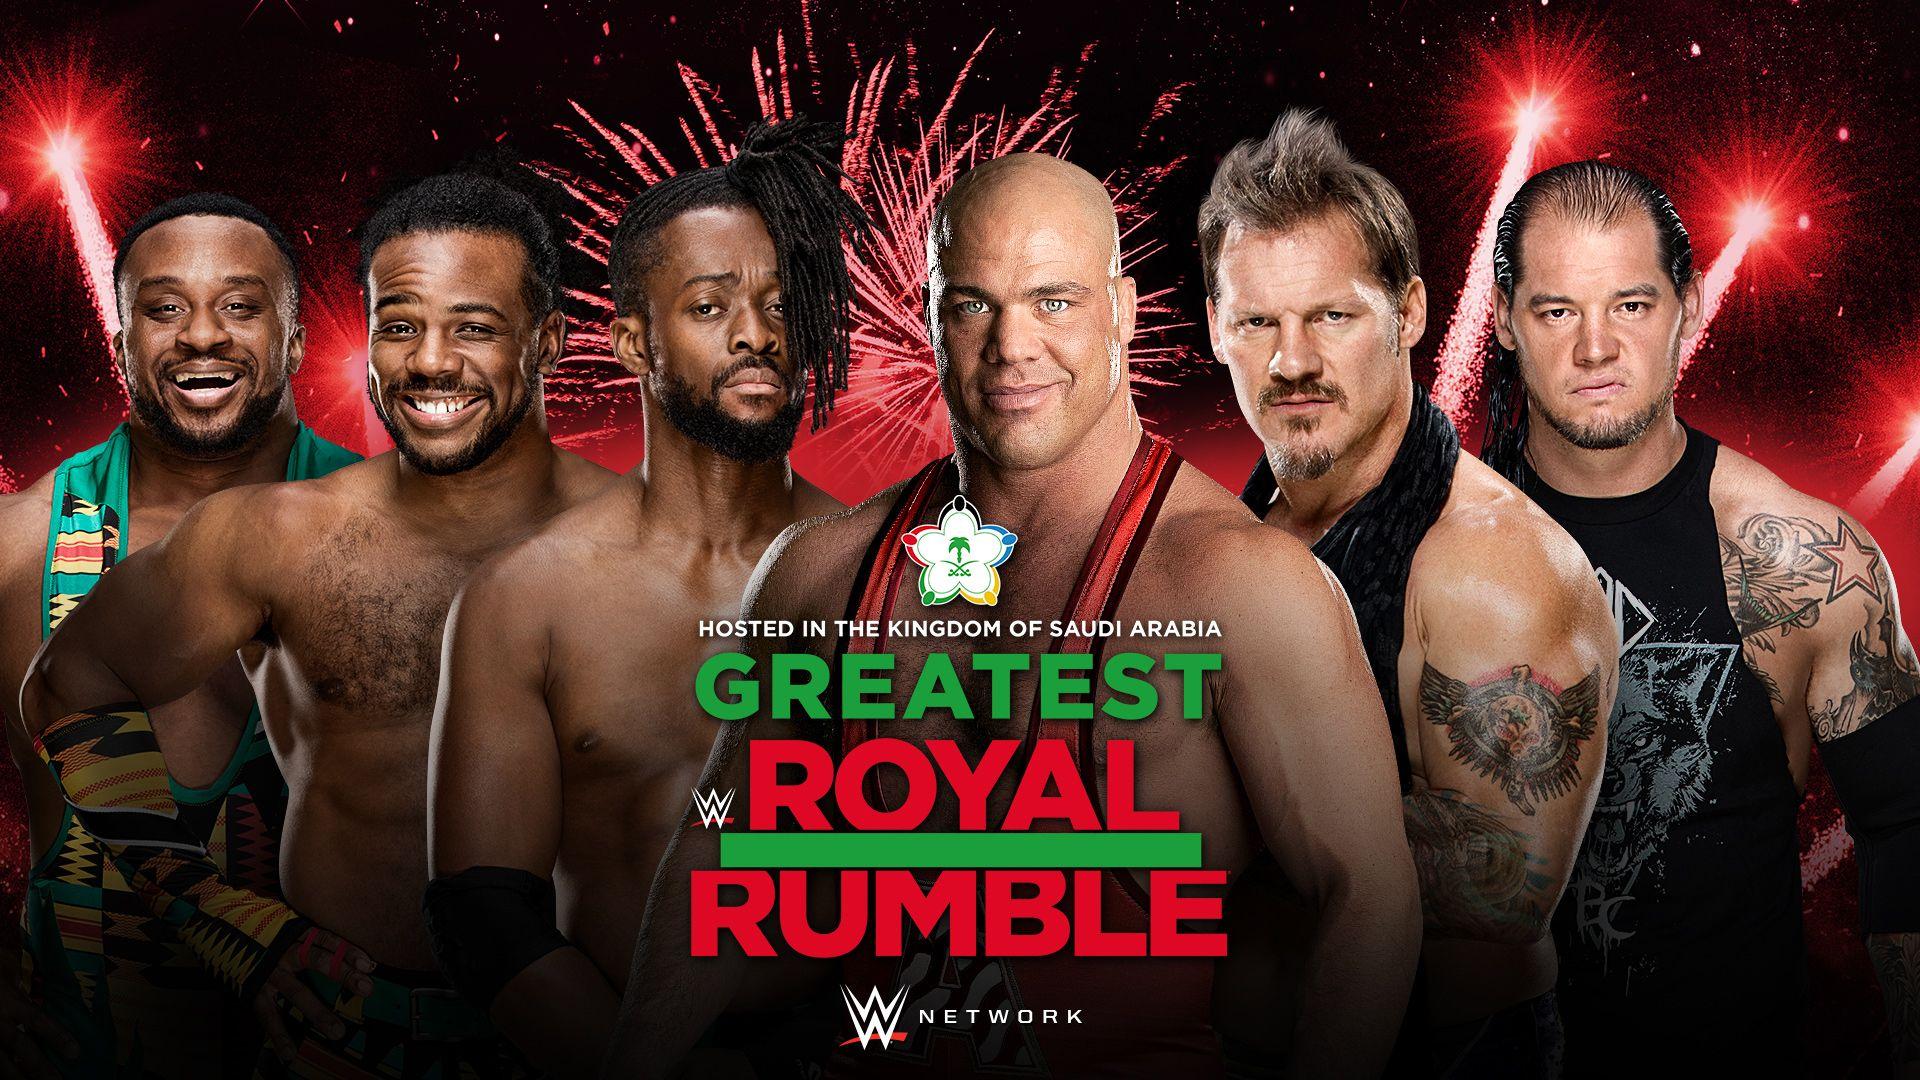 WWE® Adds 15 More Superstars to Greatest Royal Rumble® Match